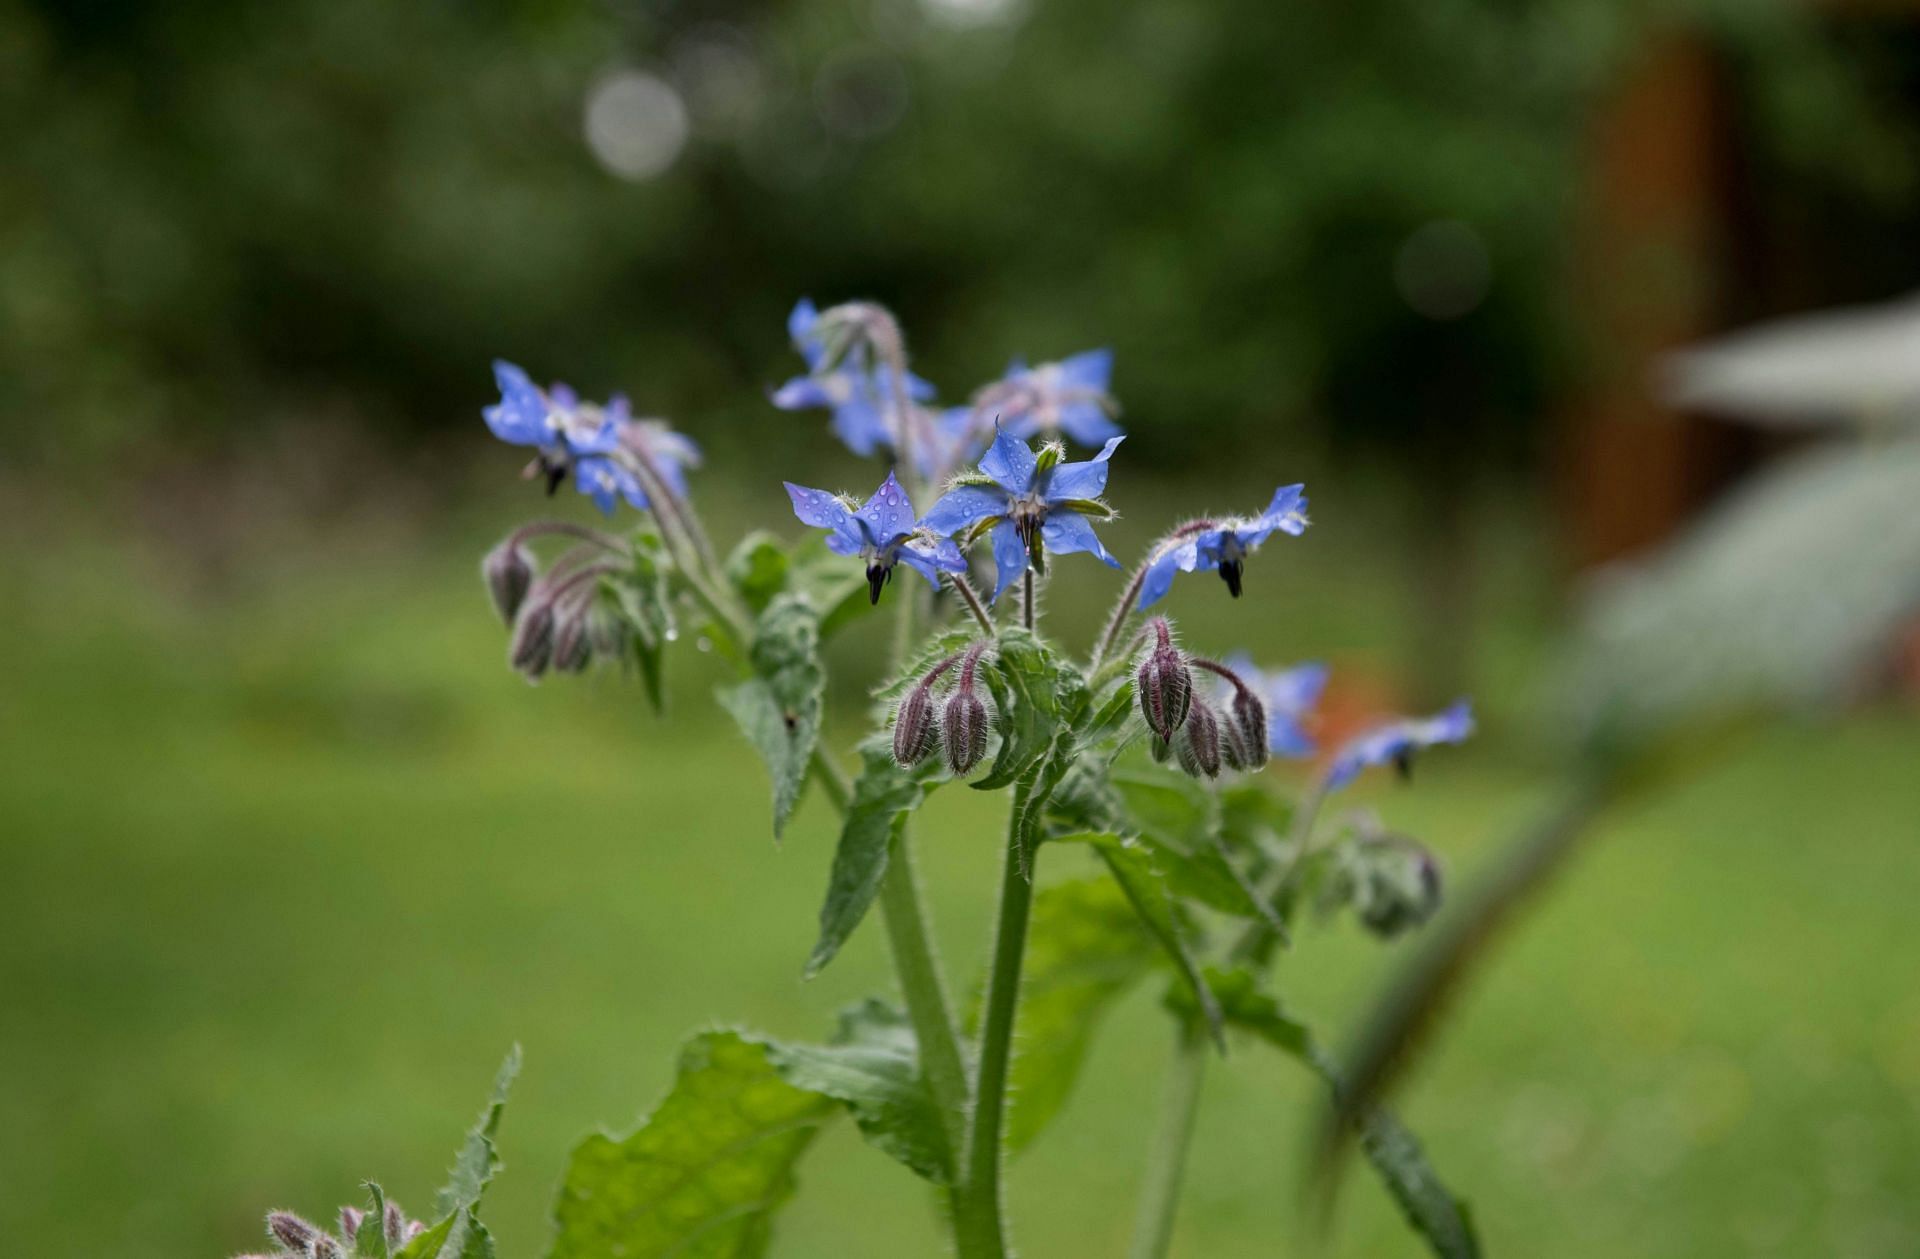 Borage oil benefits can be enjoyed by eating the plant too (Image by Julietta Watson/Unsplash)